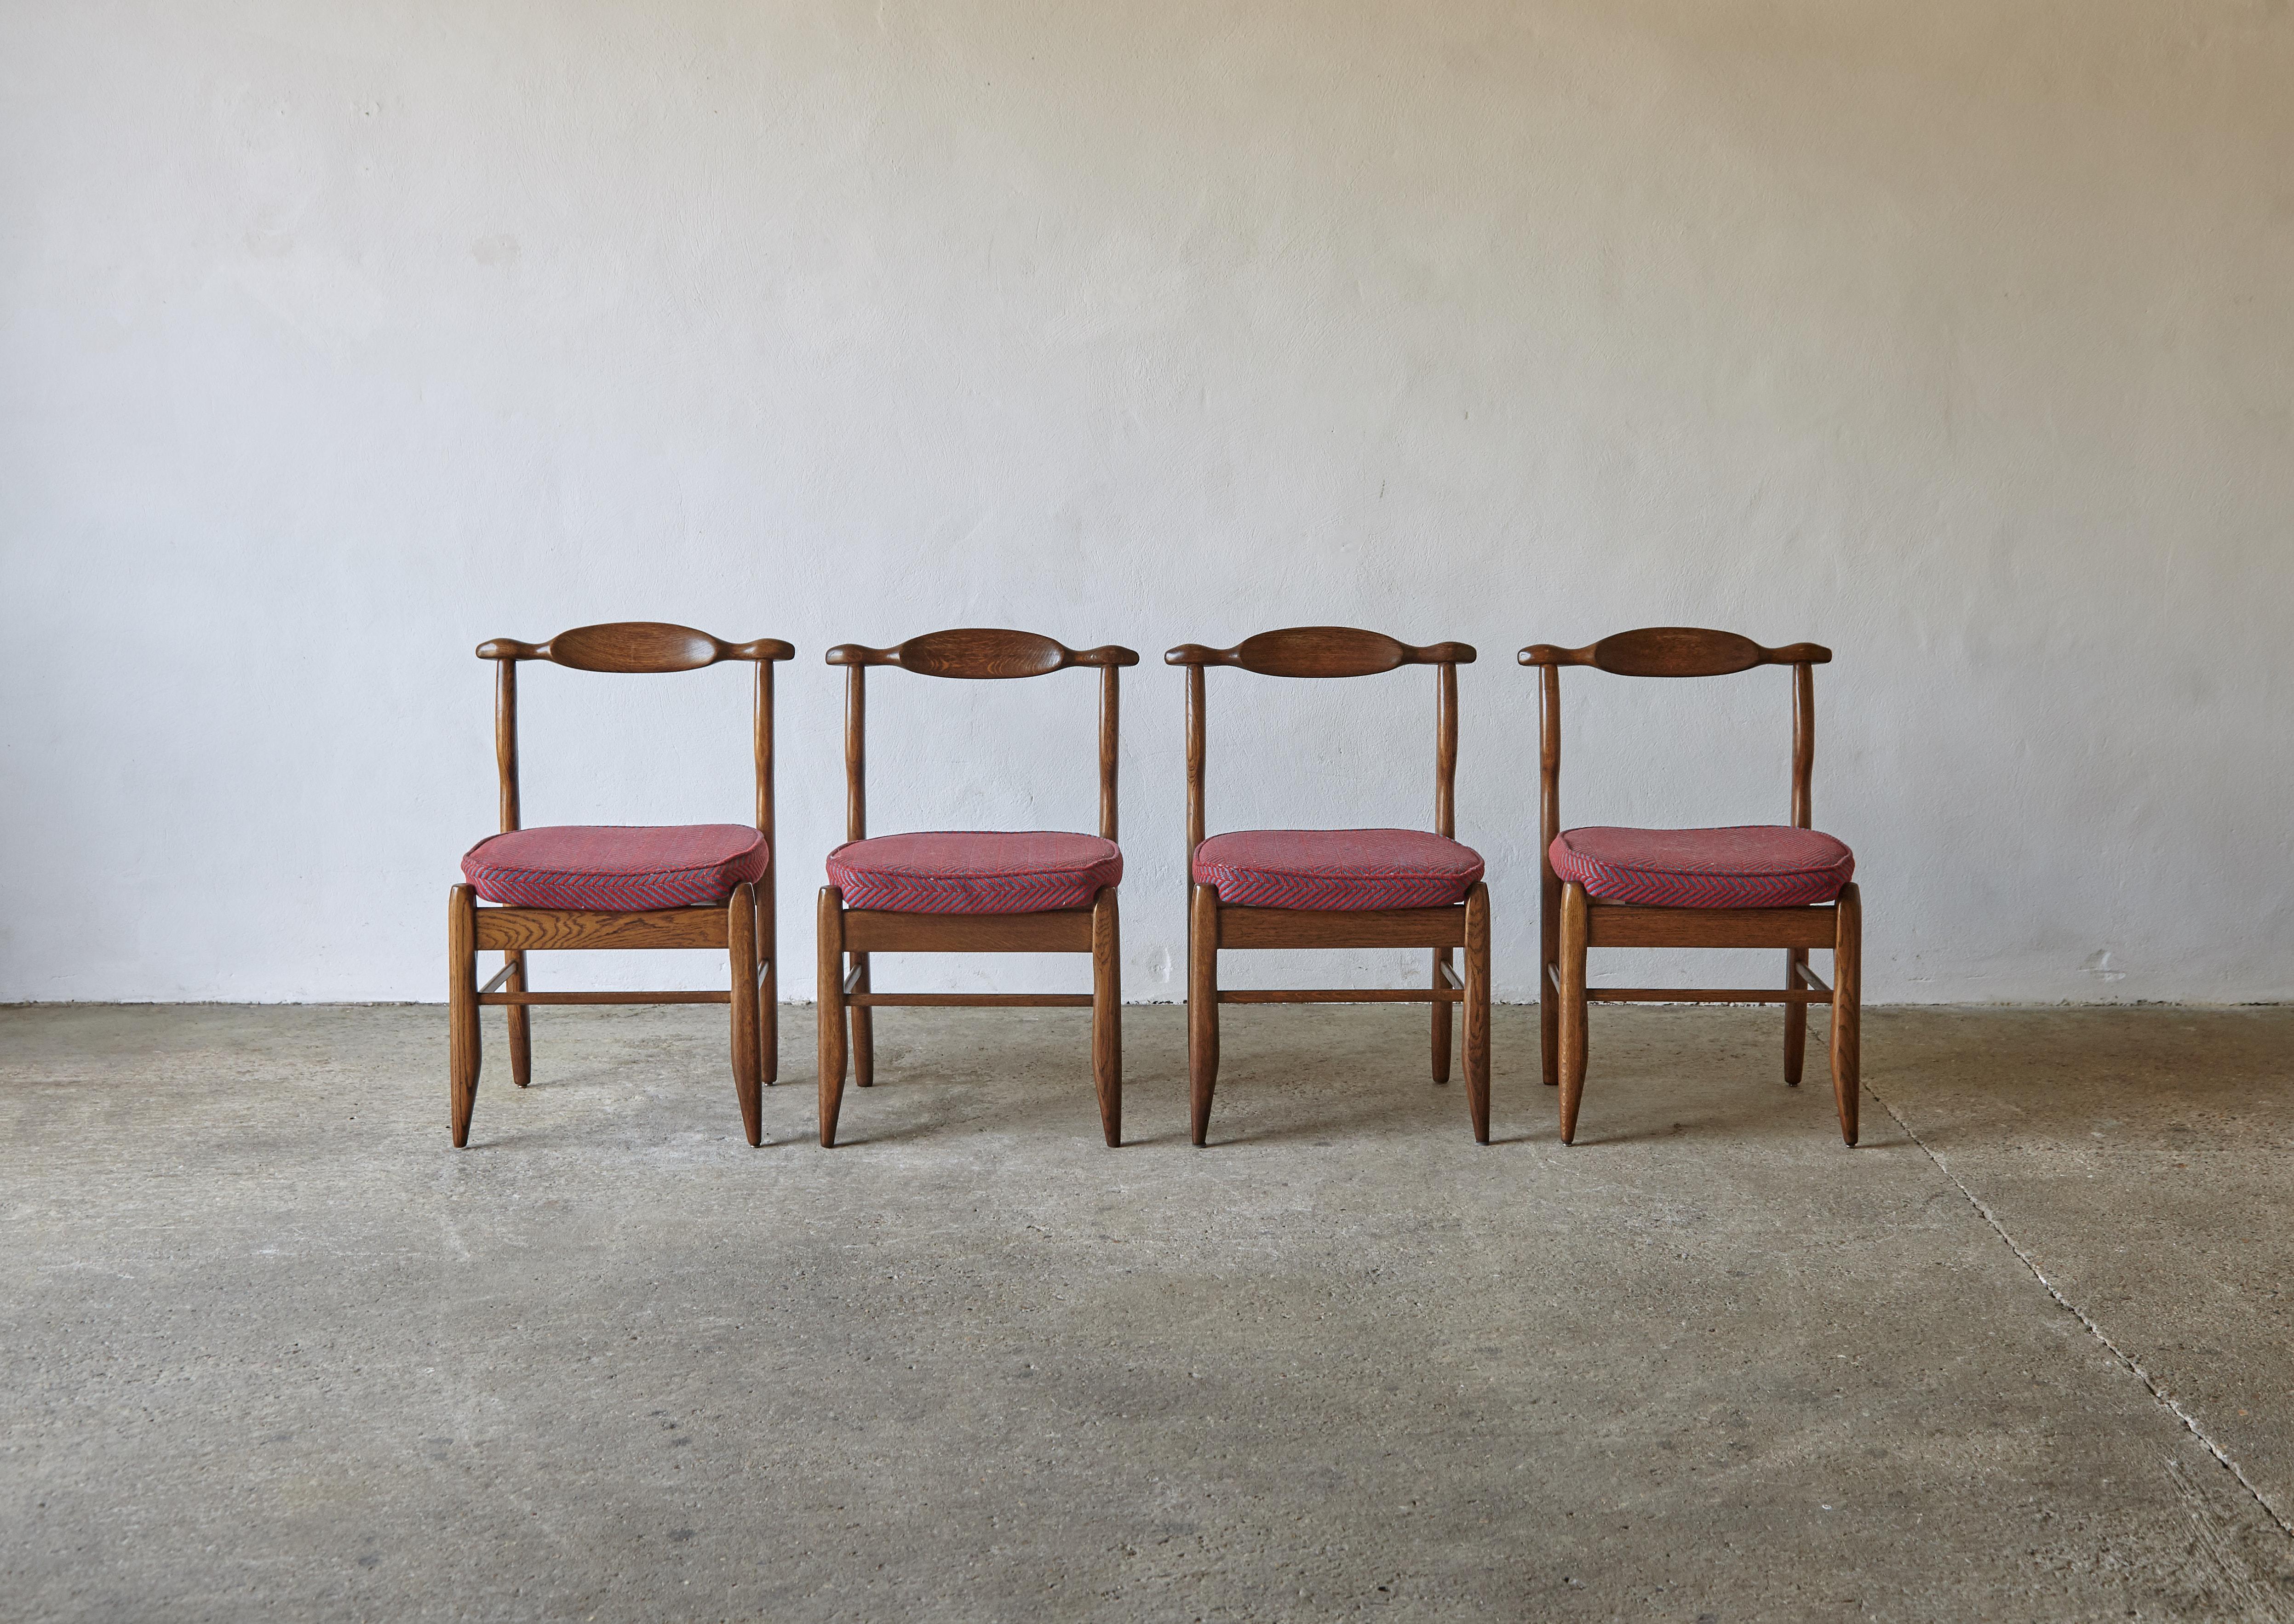 A superb set of four oak dining chairs by Guillerme et Chambron, France, 1960s. The wooden frames are in great condition with a wonderful tone. The seat cushions are in good condition but one has some minor fraying on the piping and a small mark (as